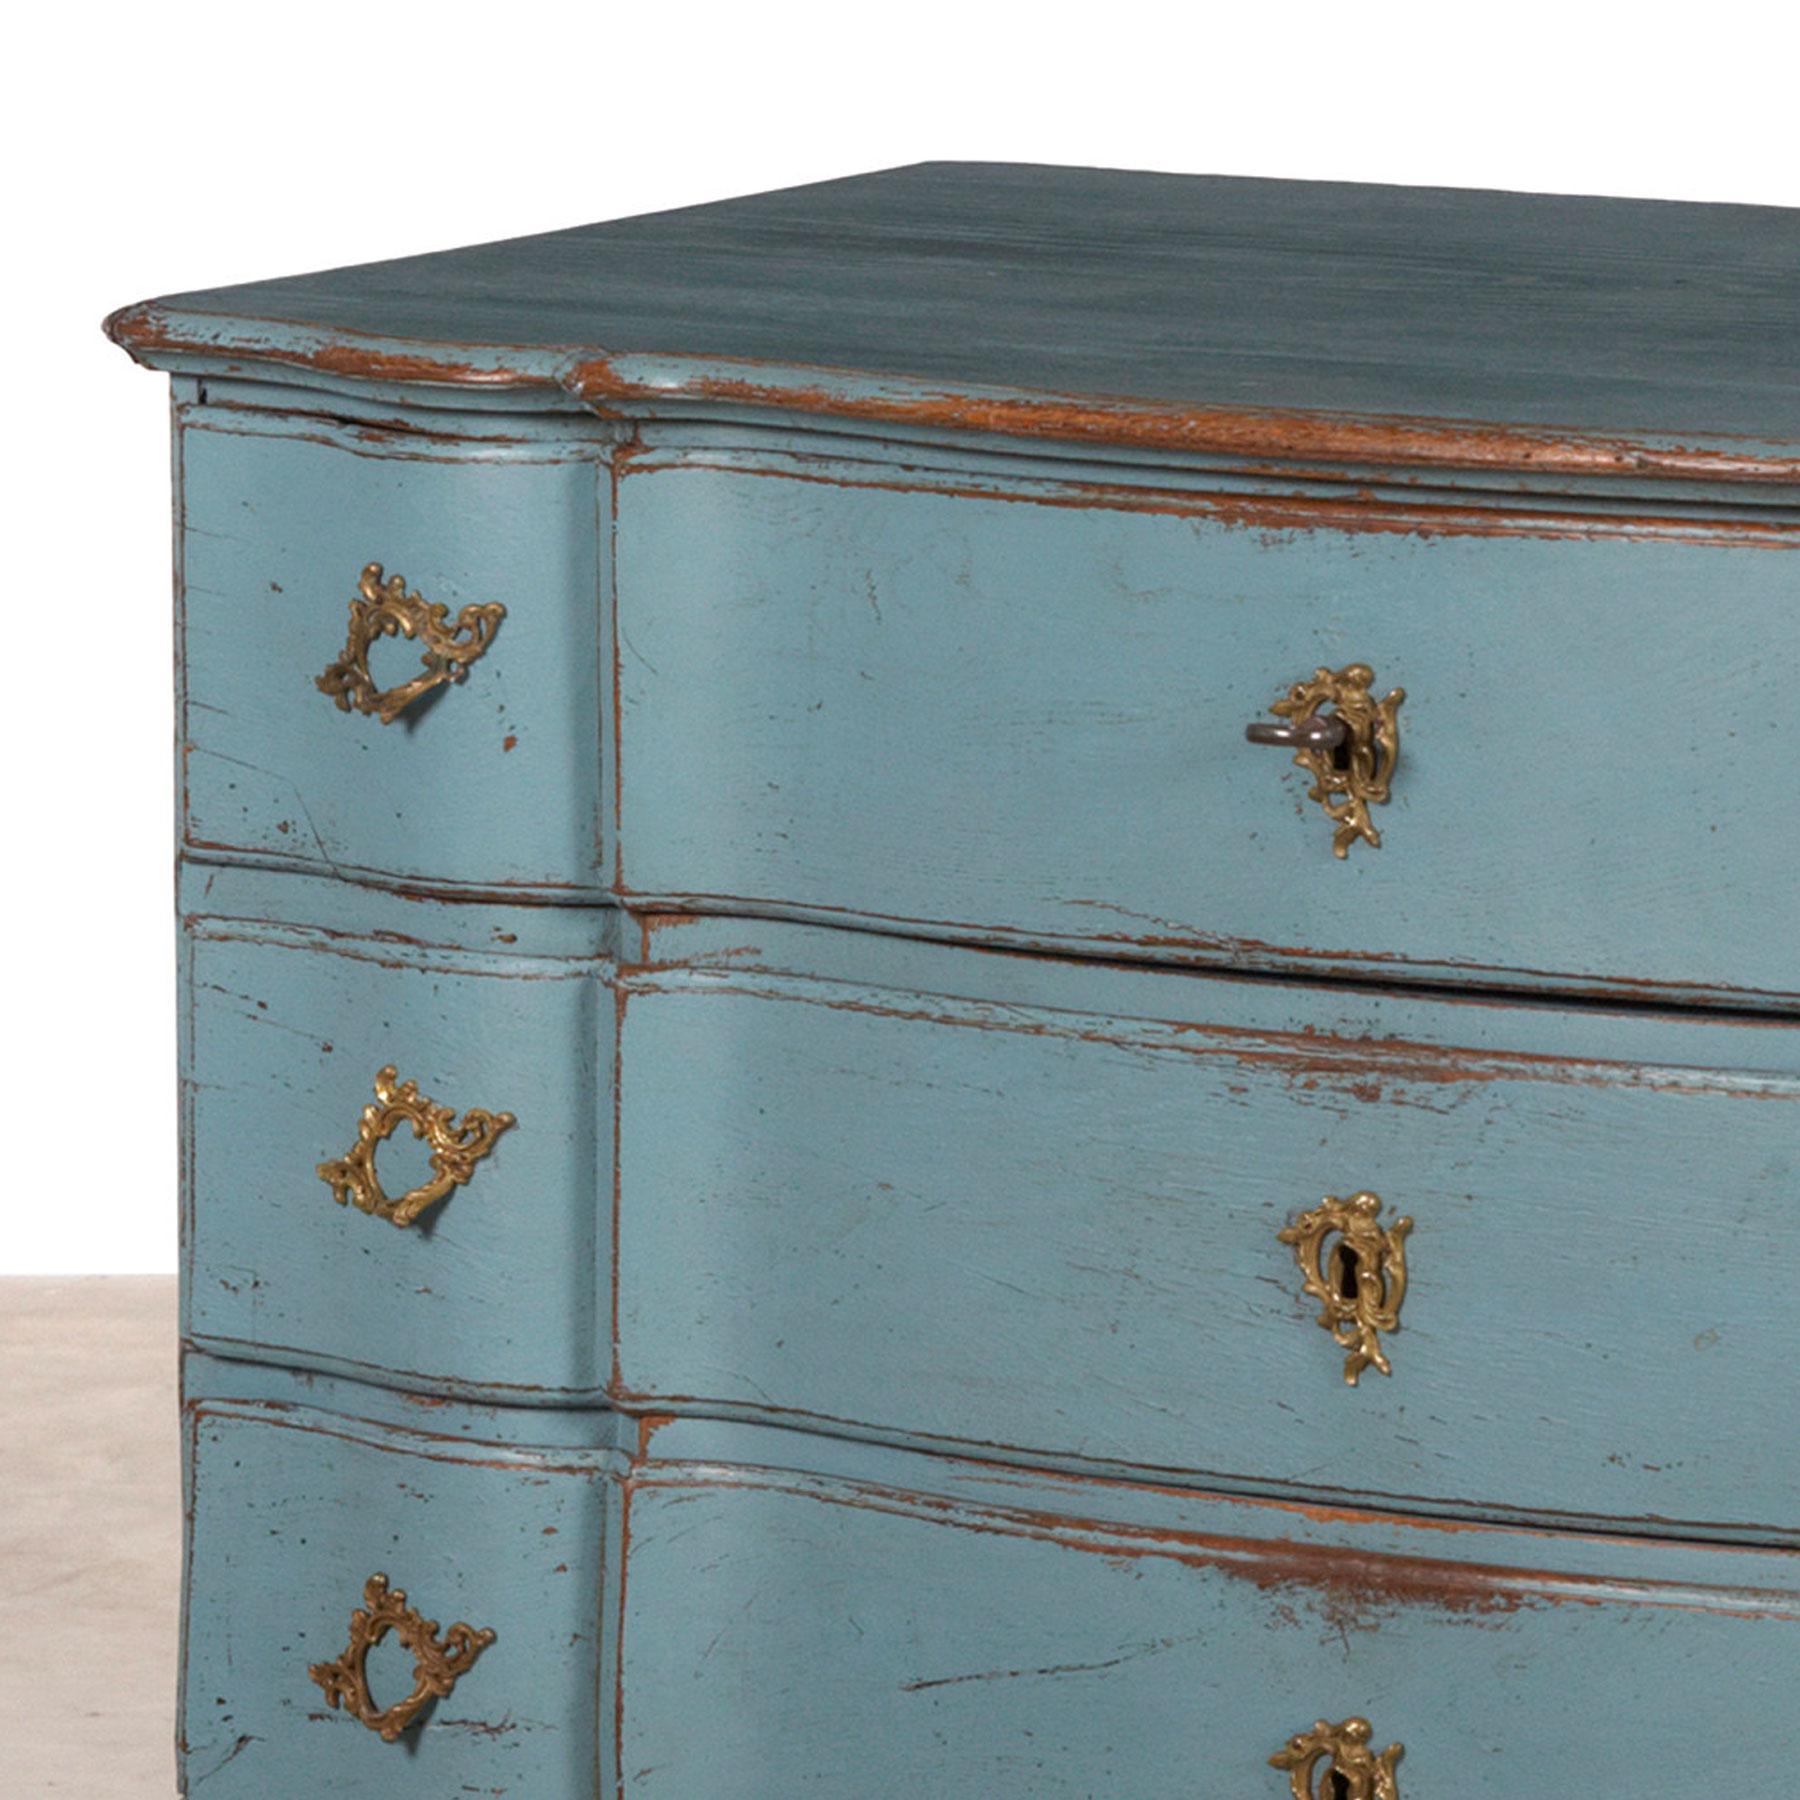 Danish Baroque chest of drawers, 1730-1750. Decorative and charming antique blue color.